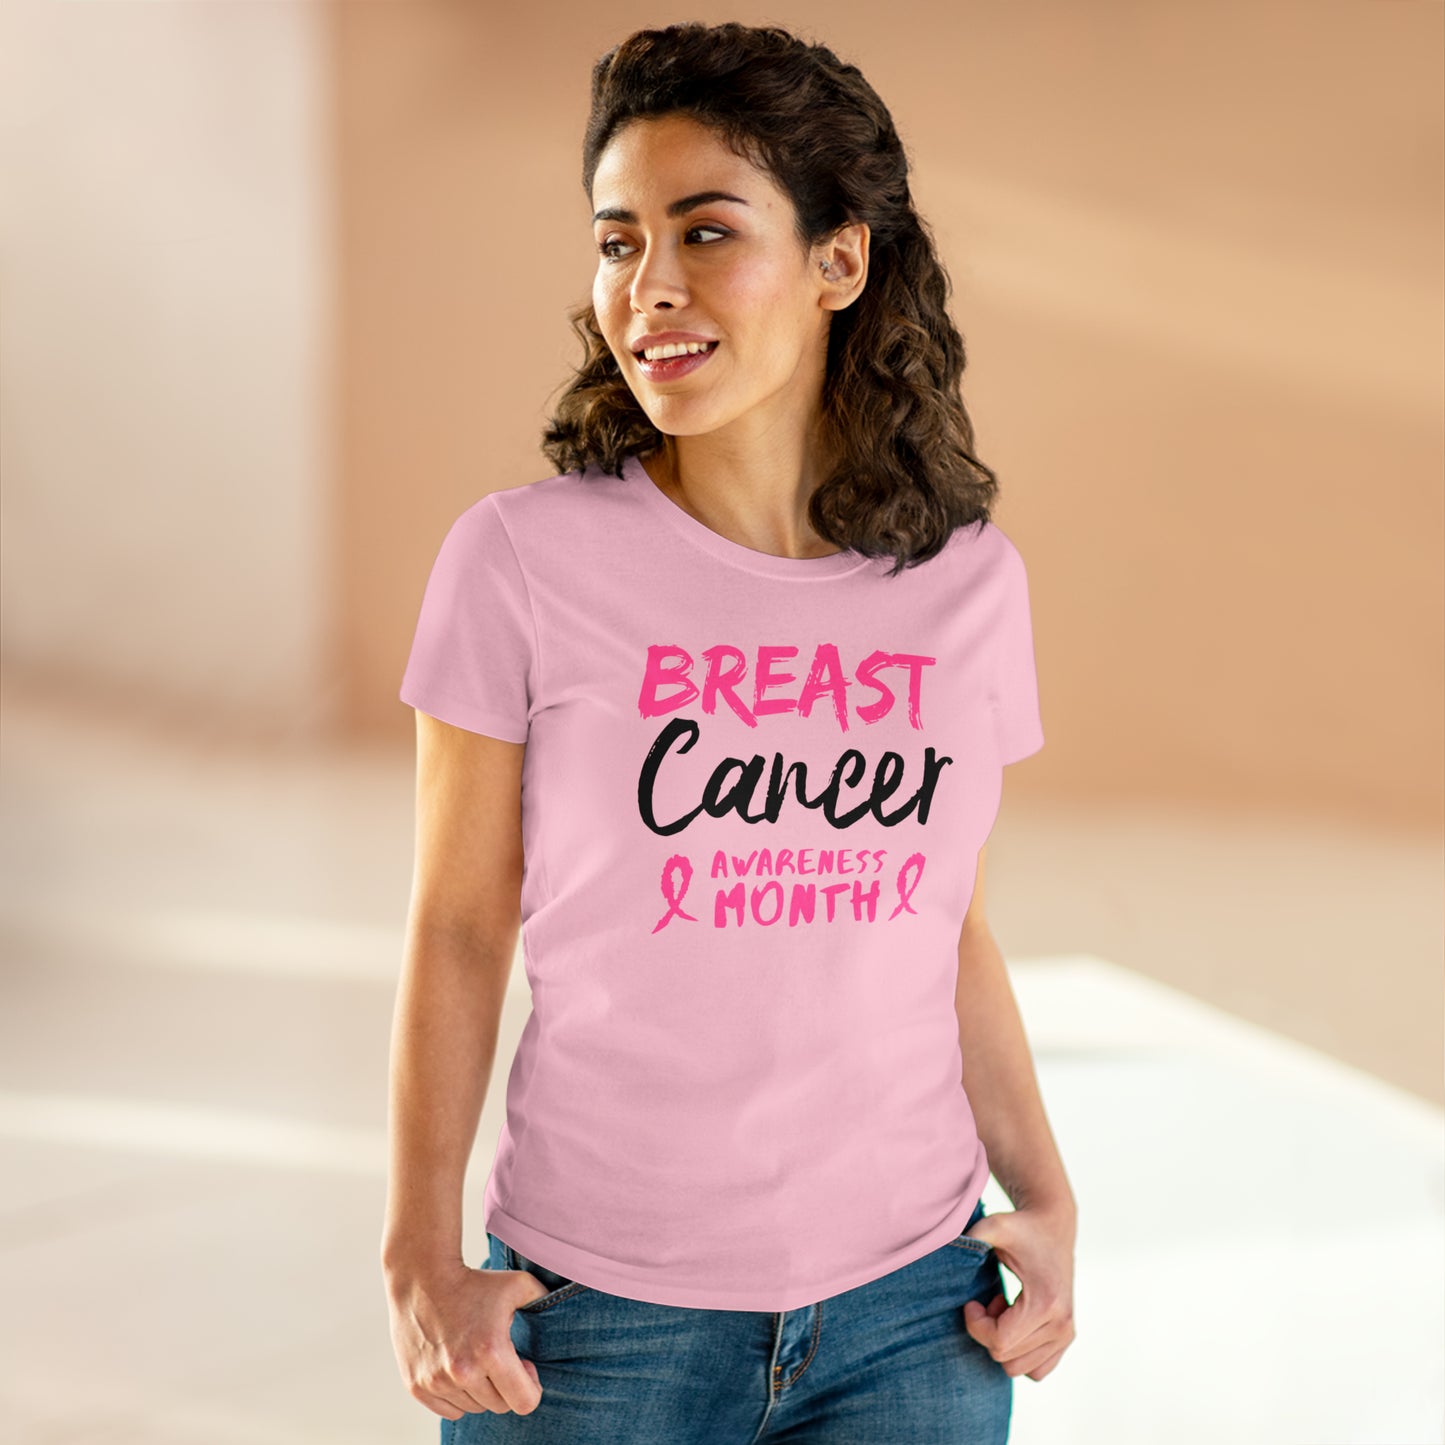 Breast Cancer Awareness Month Women's Midweight Cotton Tee